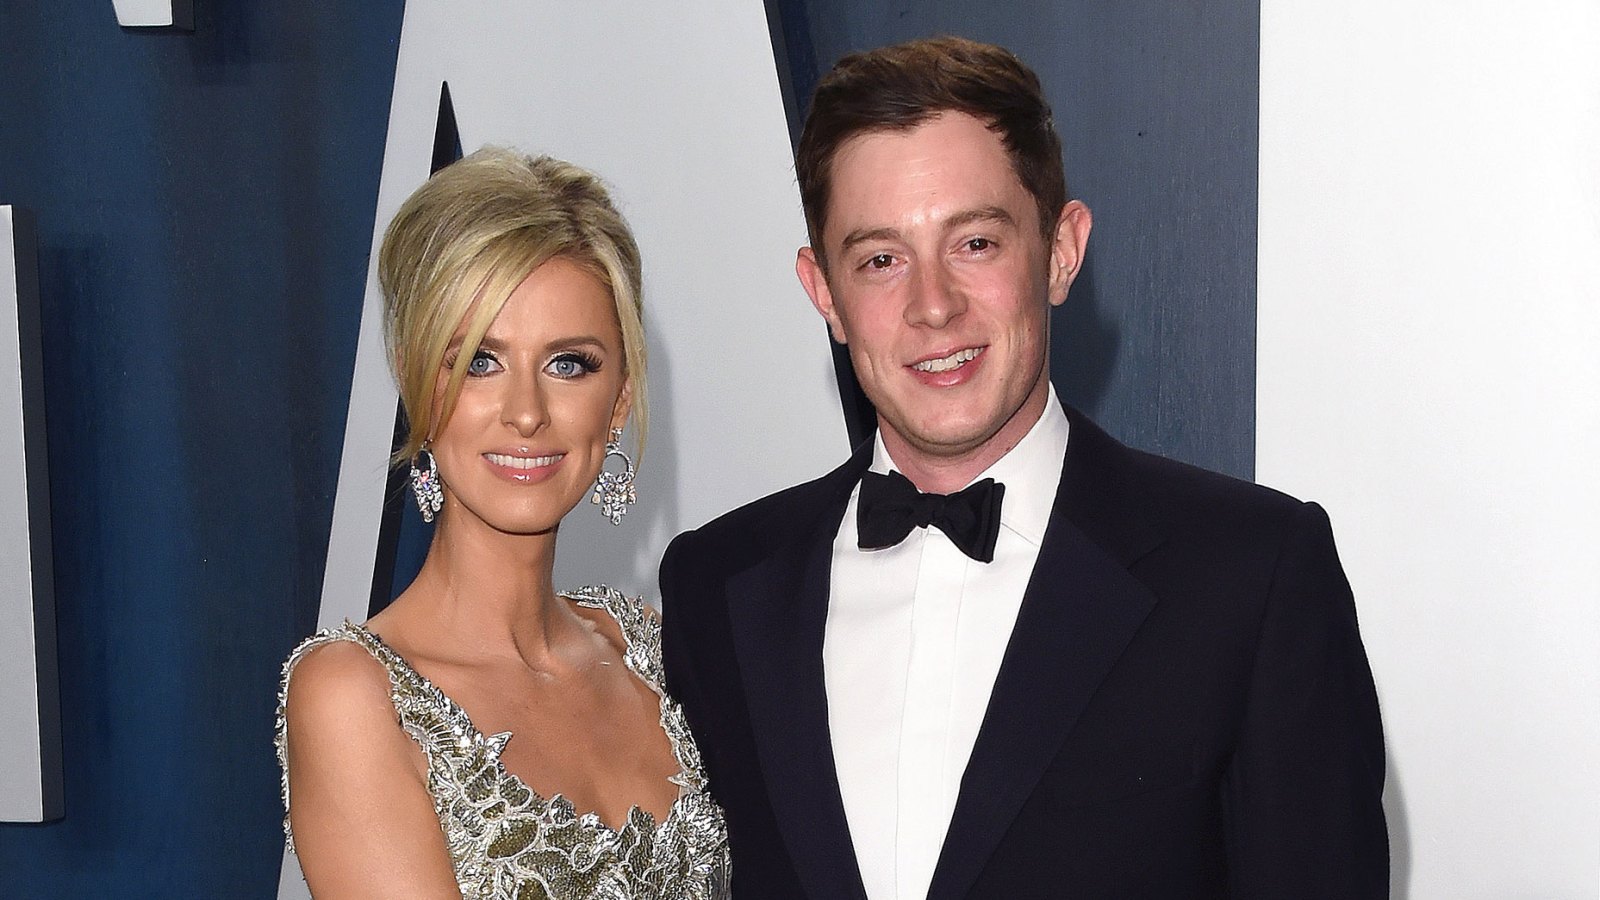 Nicky Hilton Is Pregnant Expecting 3rd Baby With Husband James Rothschild